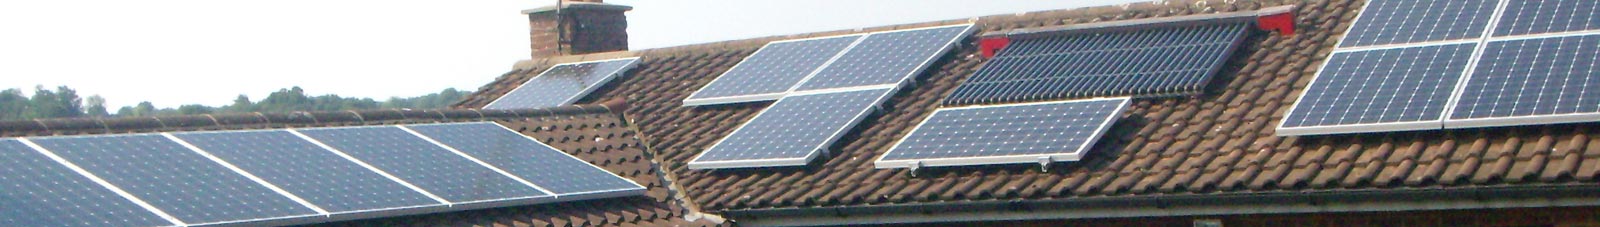 Solar panel specialist in pv panels and inverters installation